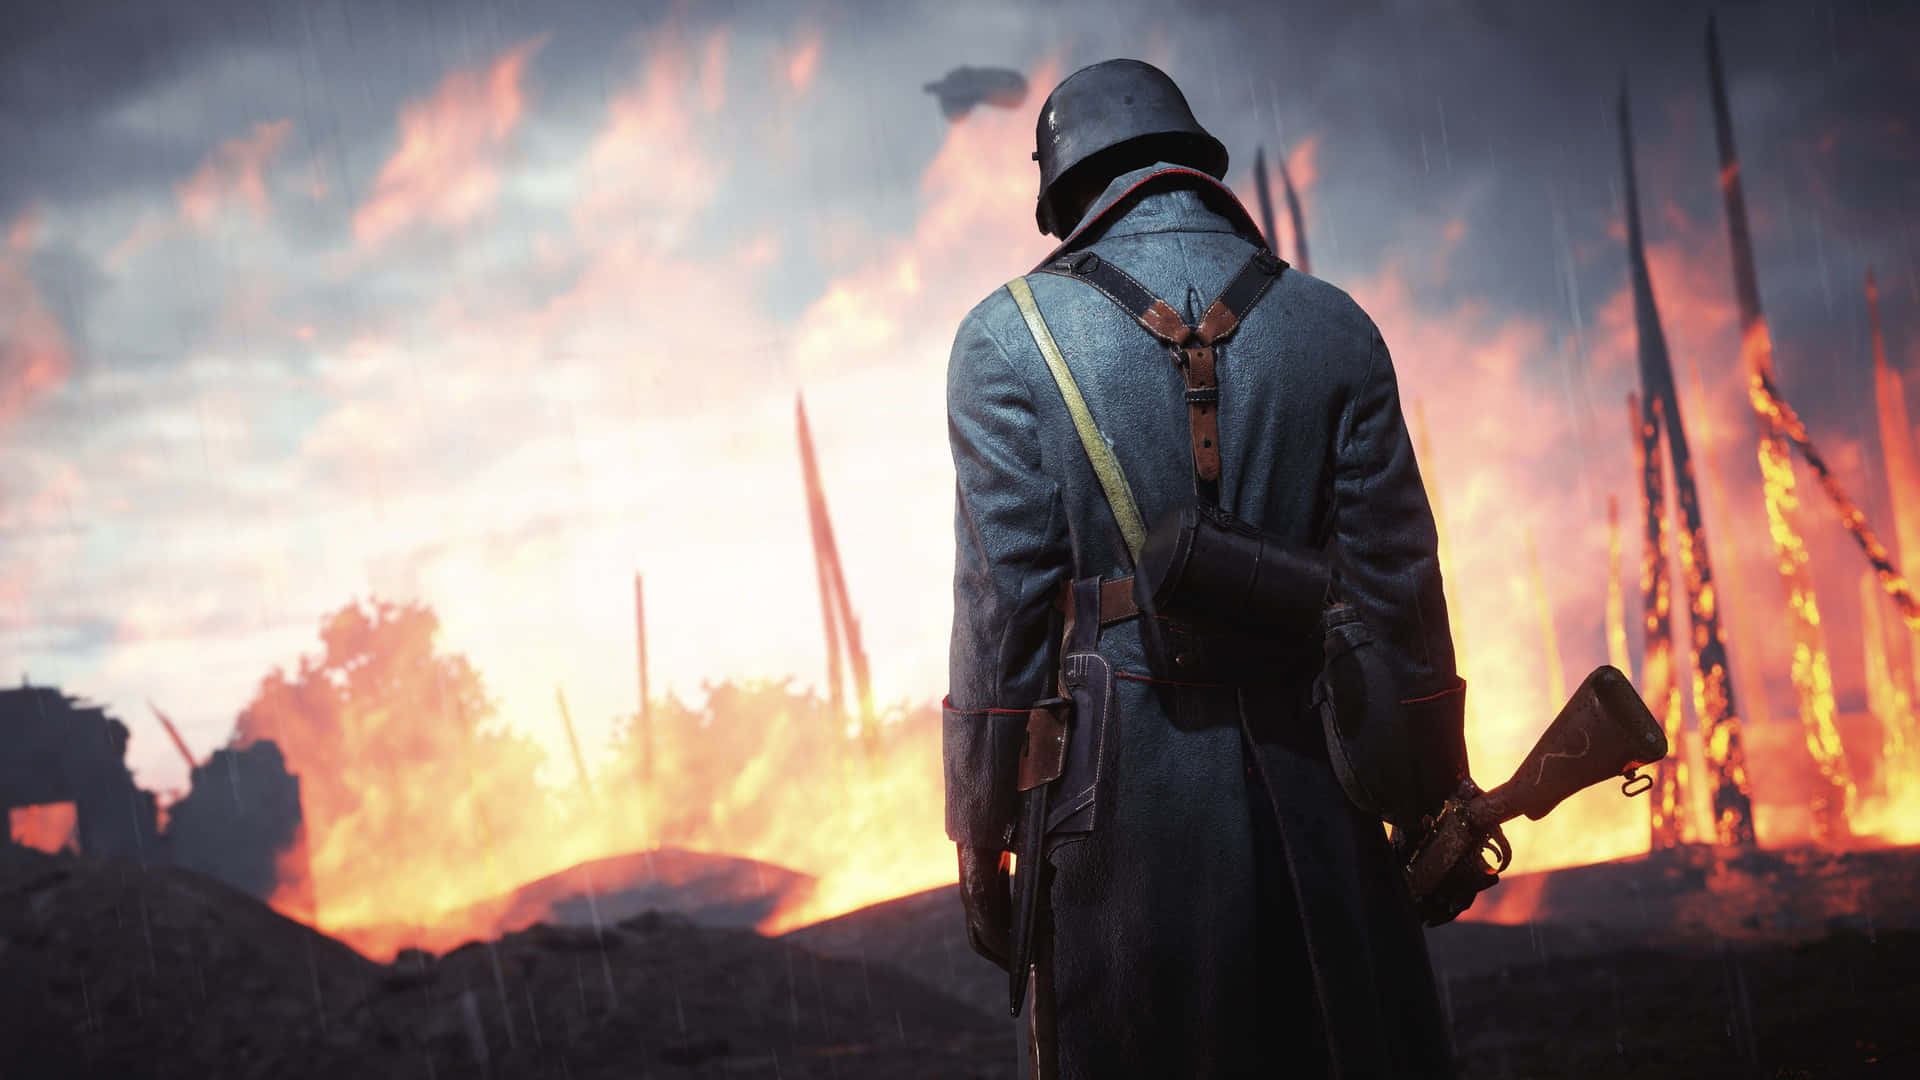 Join the war that changed the world with Battlefield 1